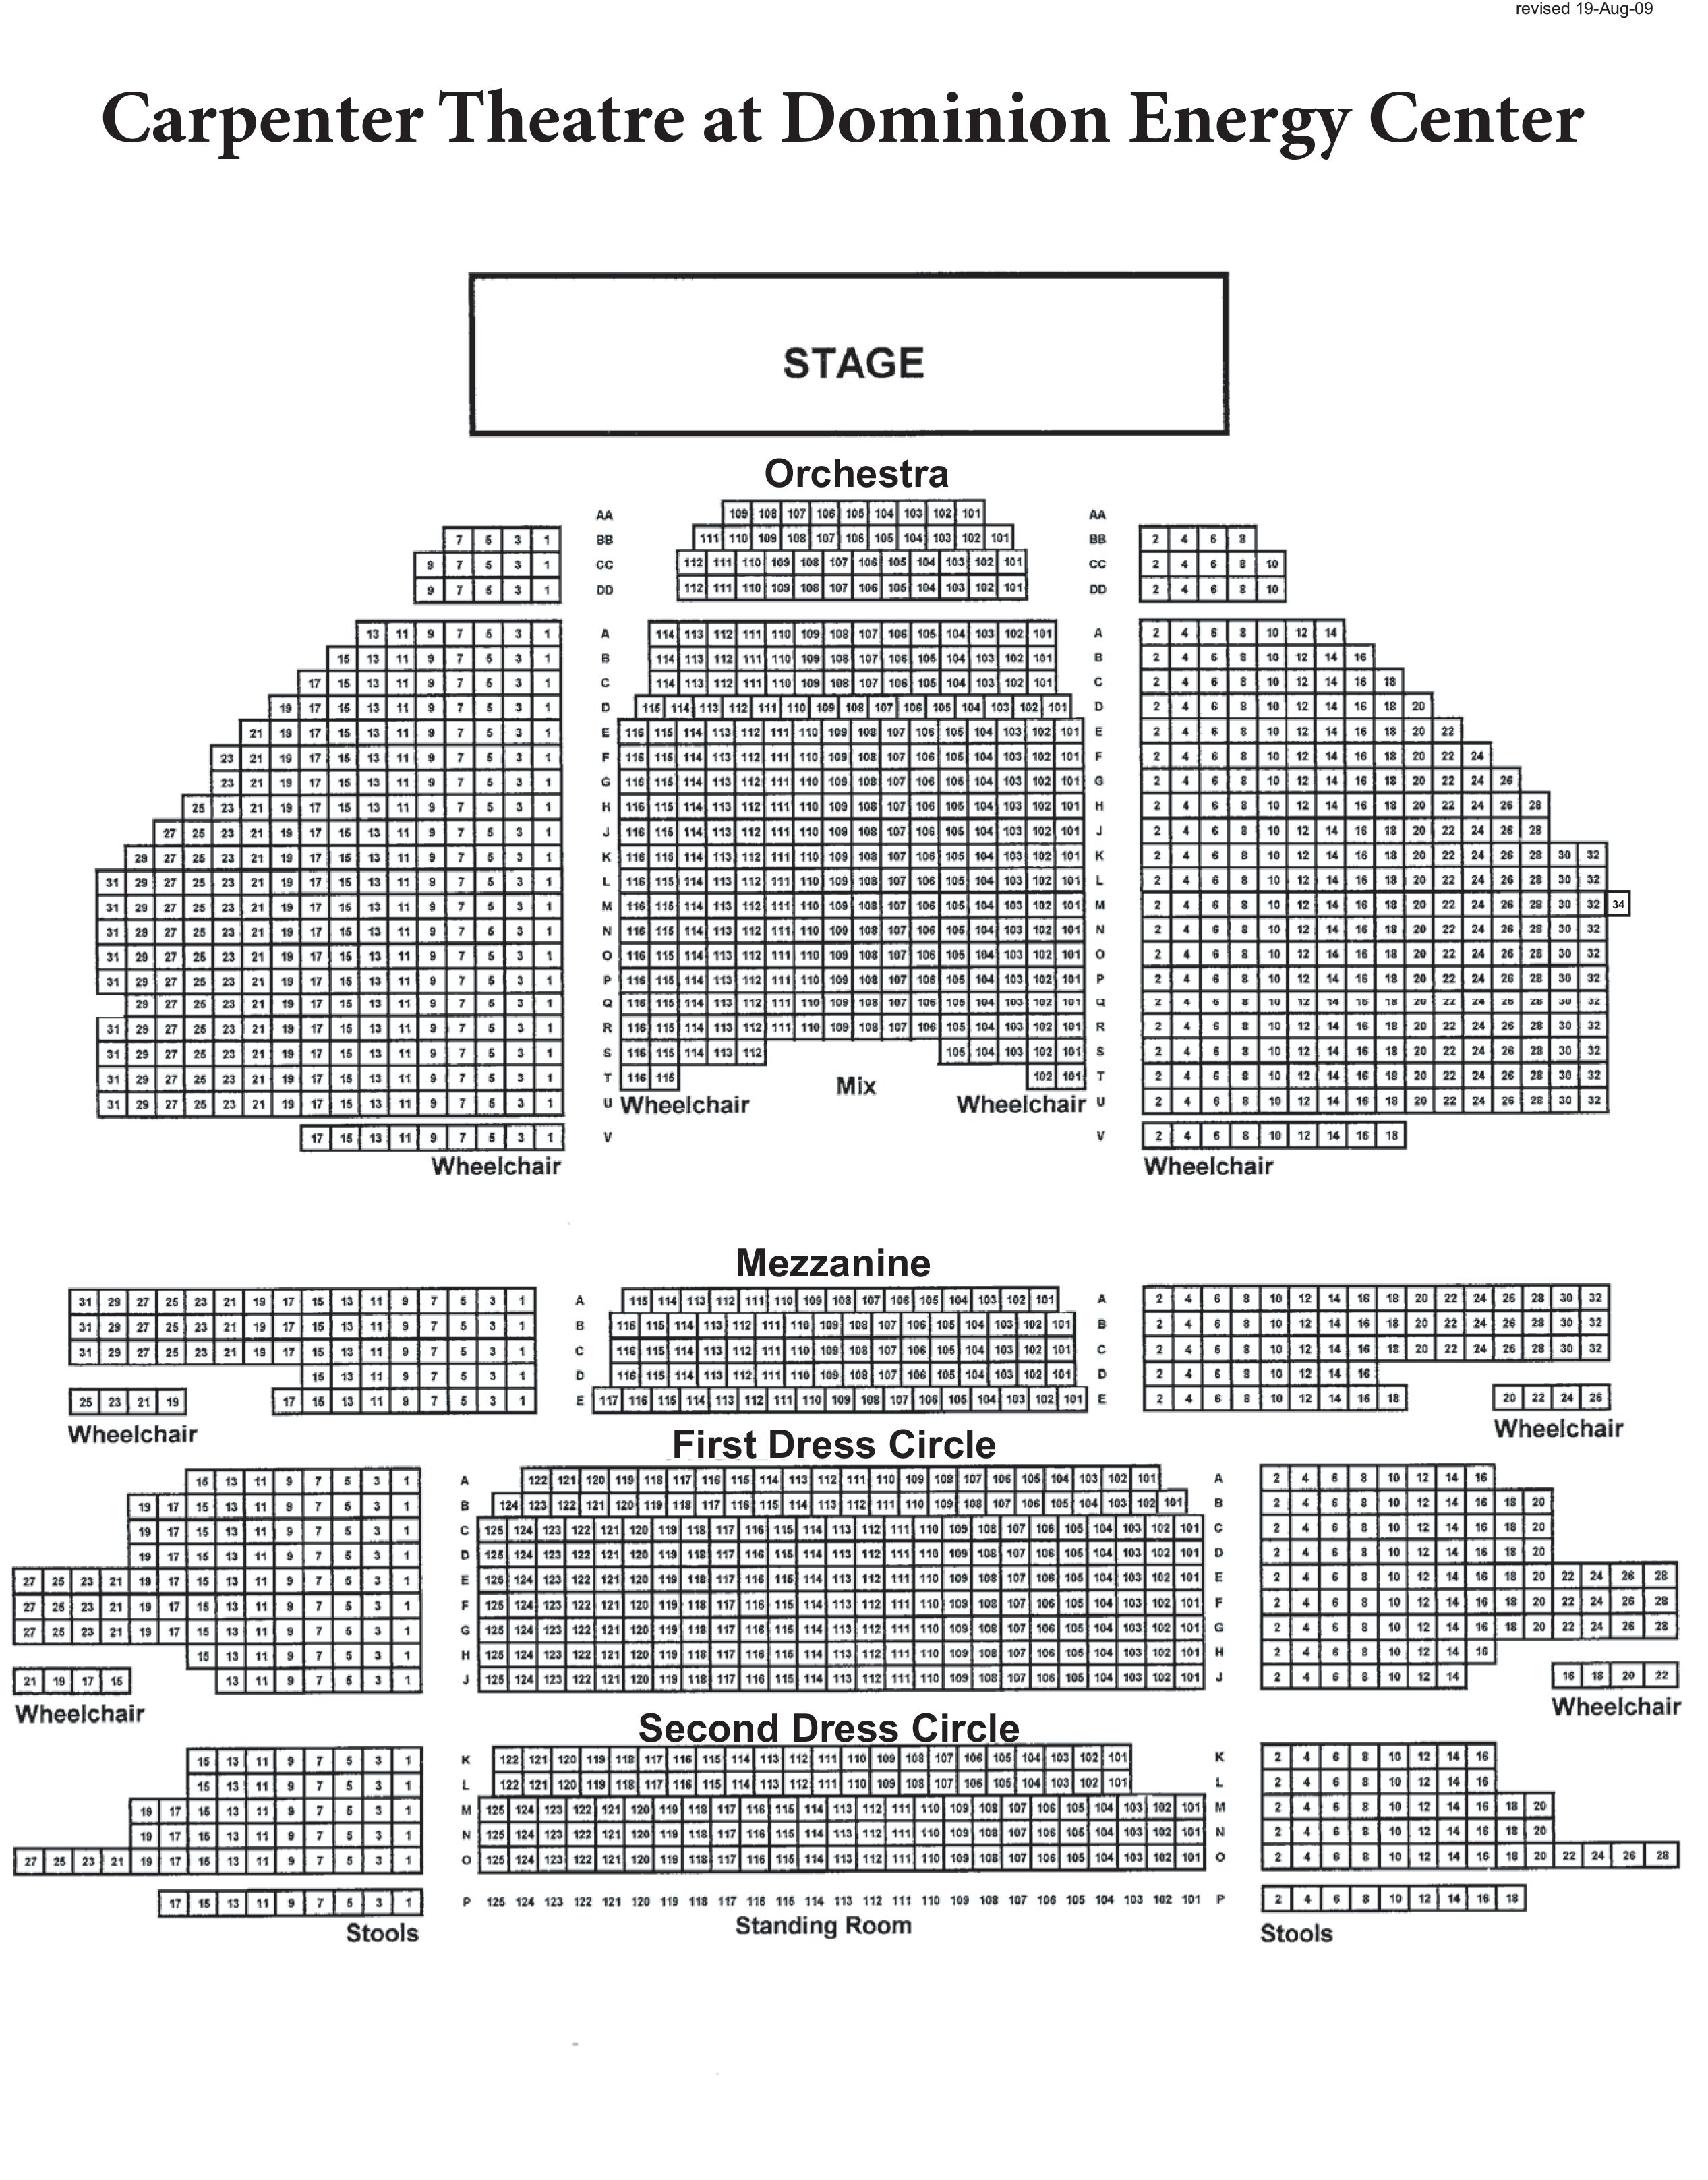 Seating Charts | Dominion Energy Center | Official Website